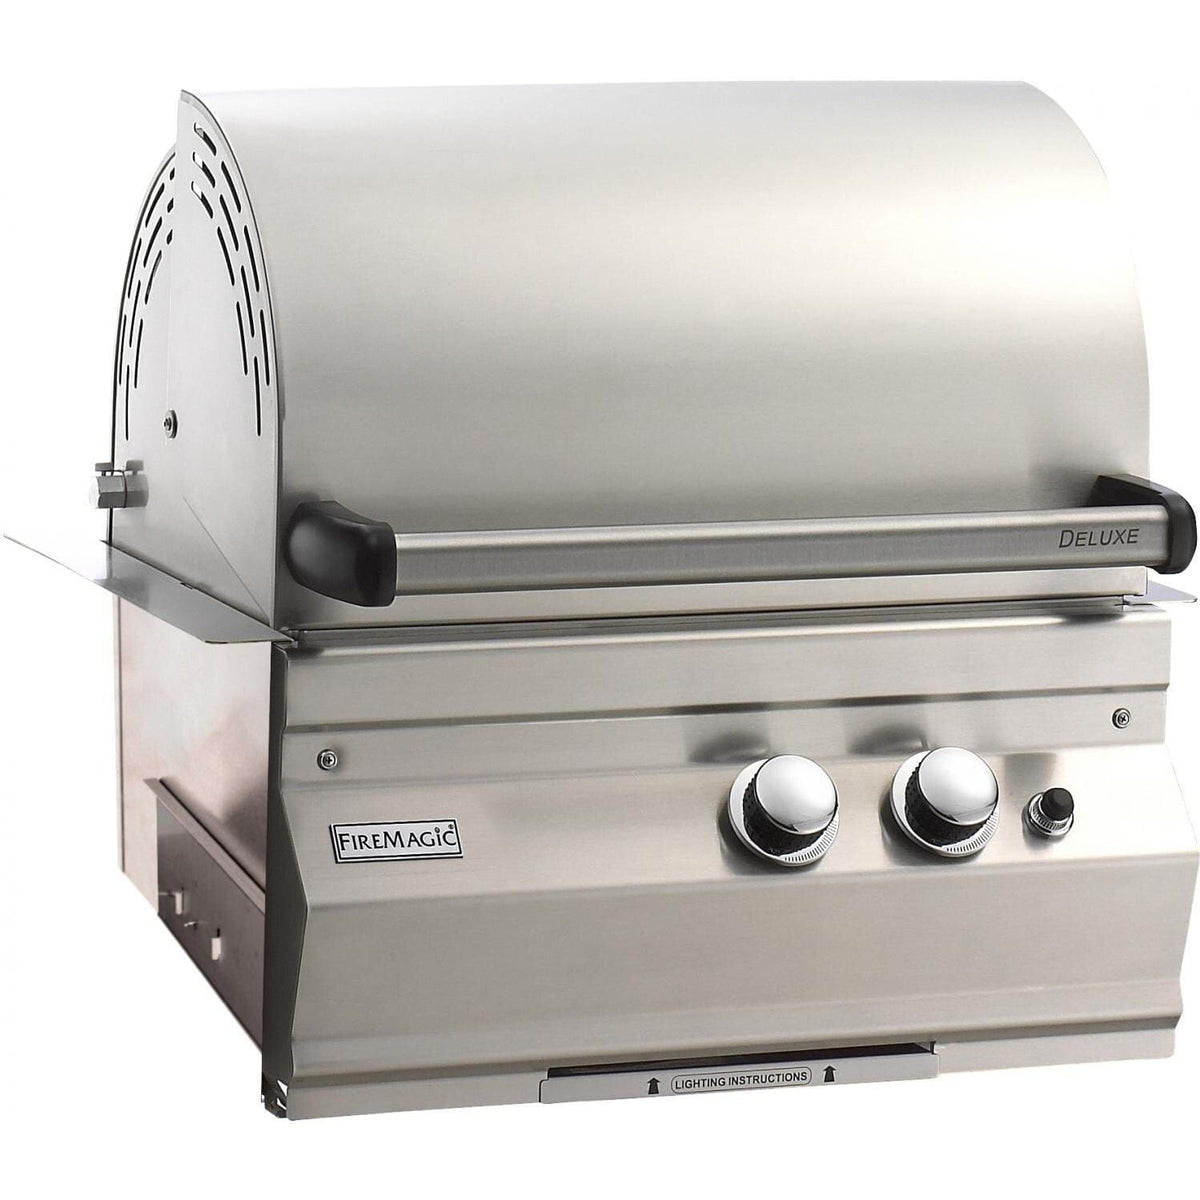 Firemagic Grills Fire Magic Legacy Deluxe Gas Built-In Grill - 11S1S1N-A